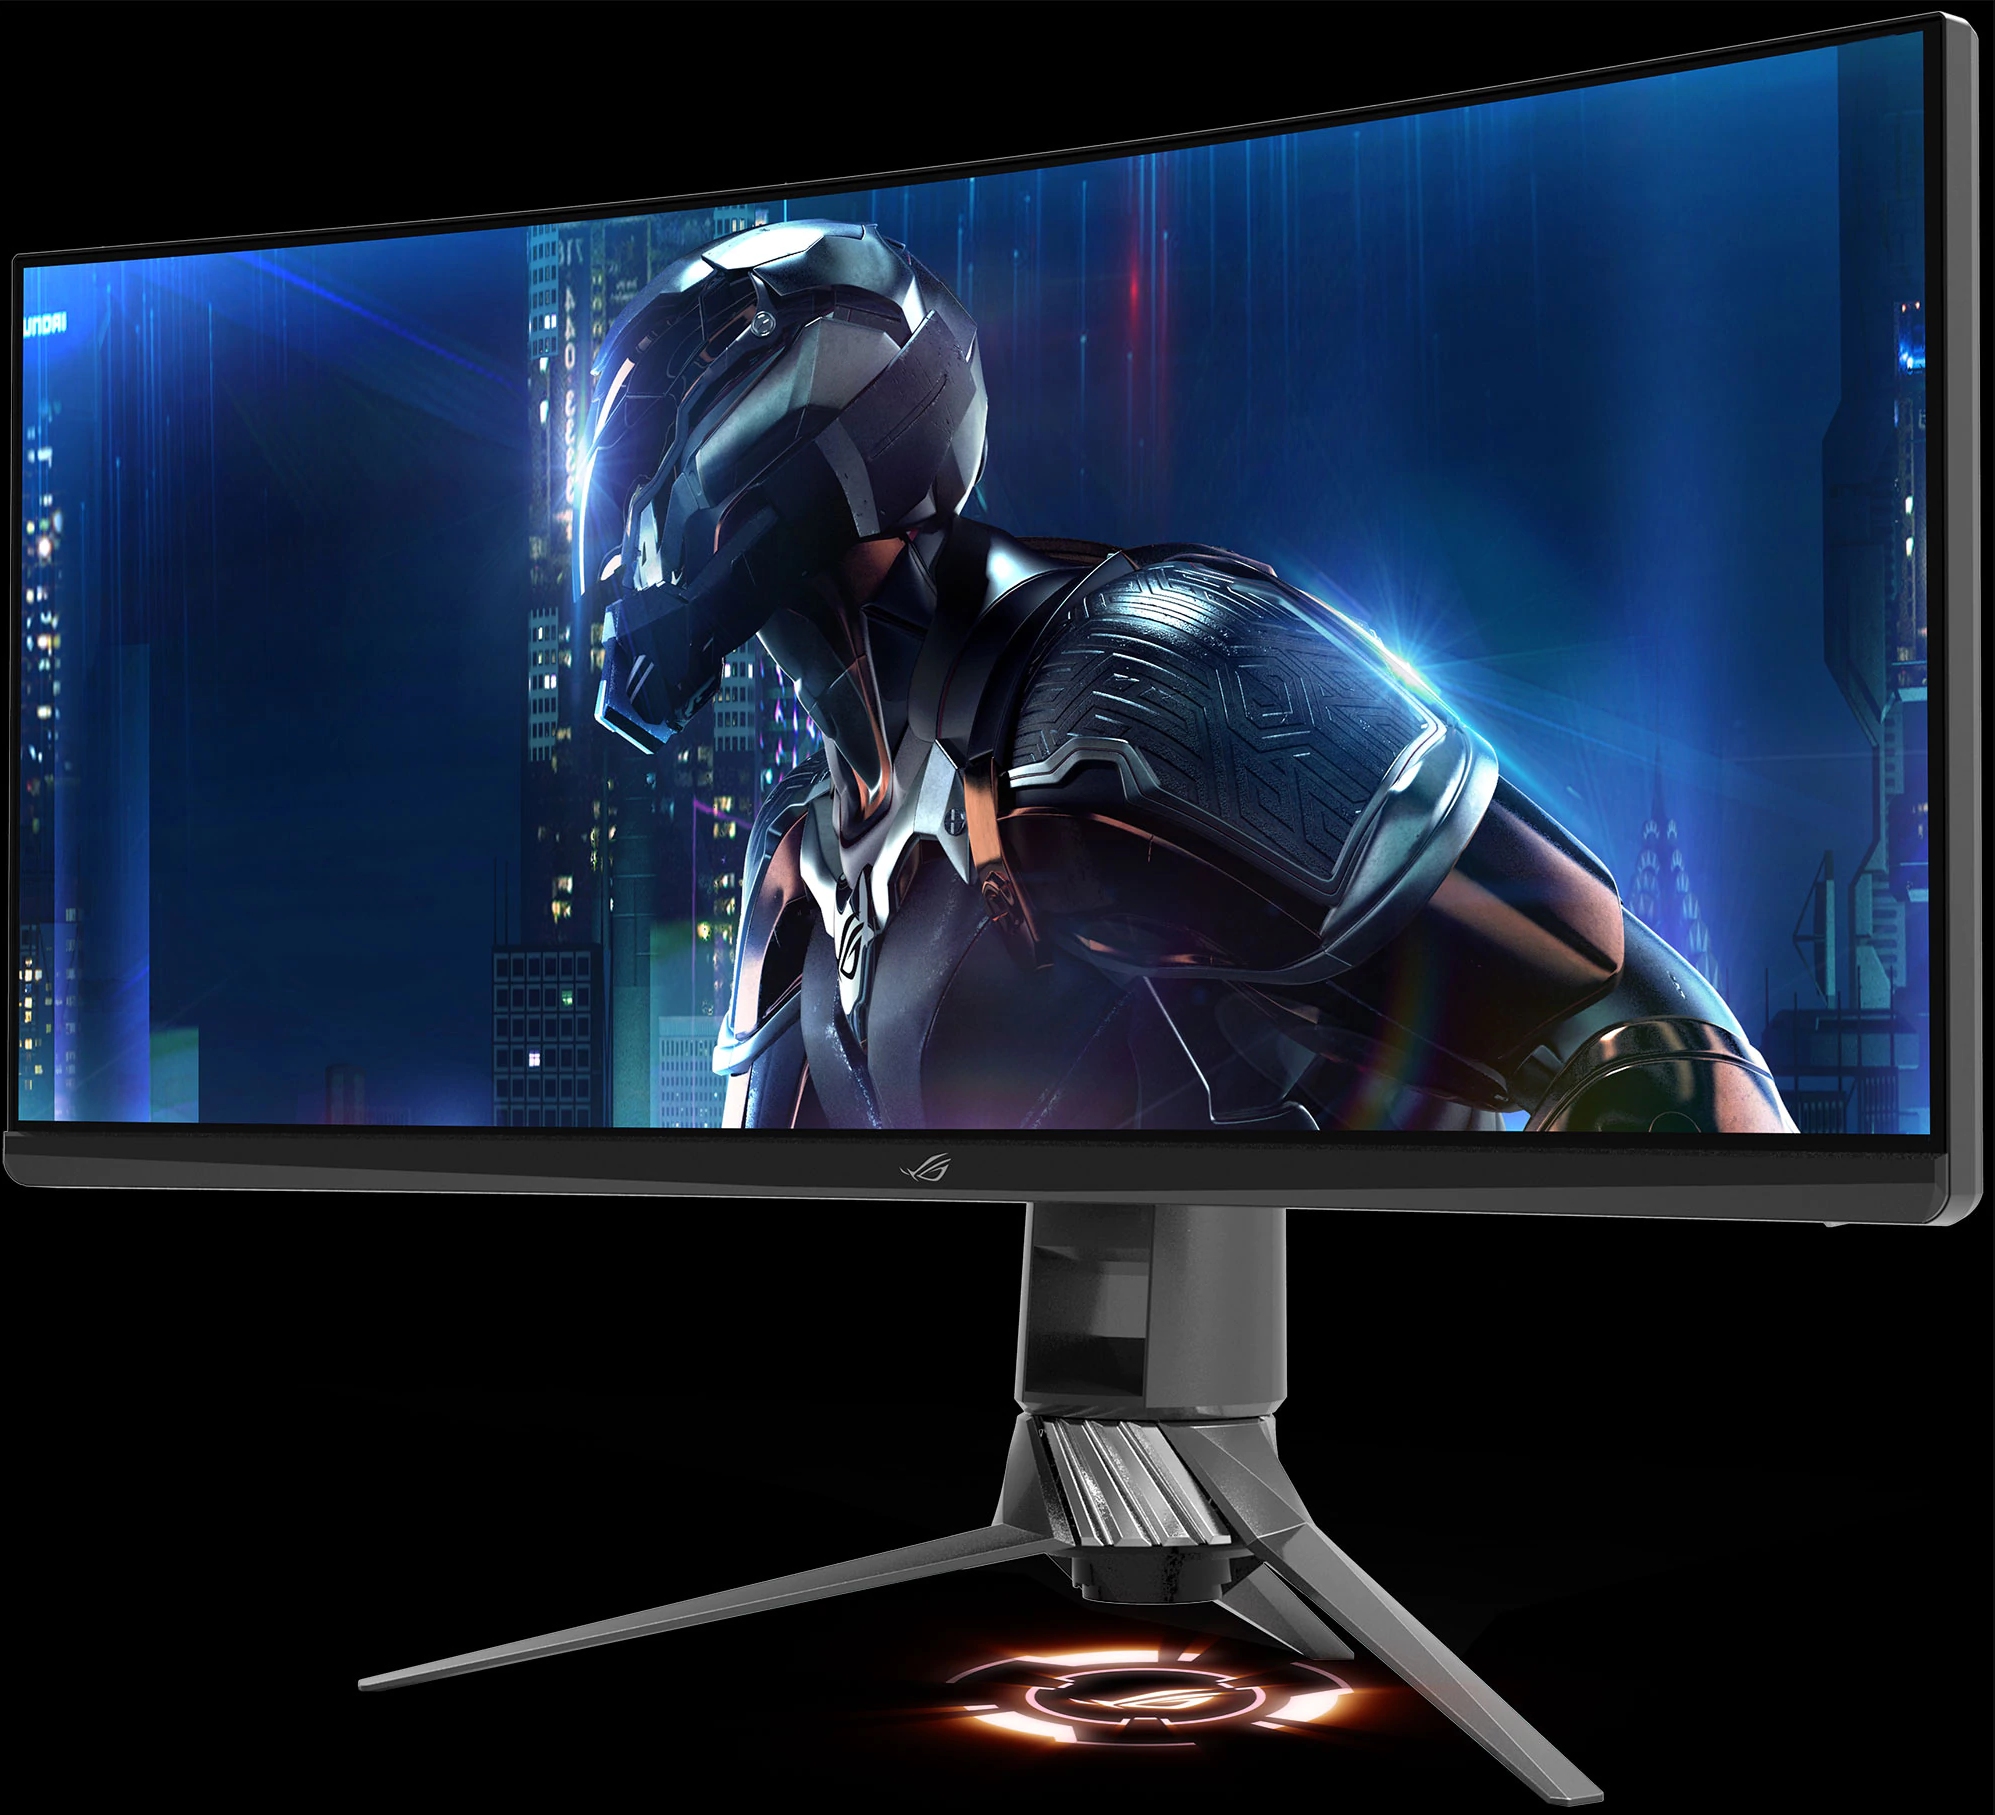 Asus announces 35-inch ROG Swift PG35VQ display with quantum dots and 200Hz refresh rate